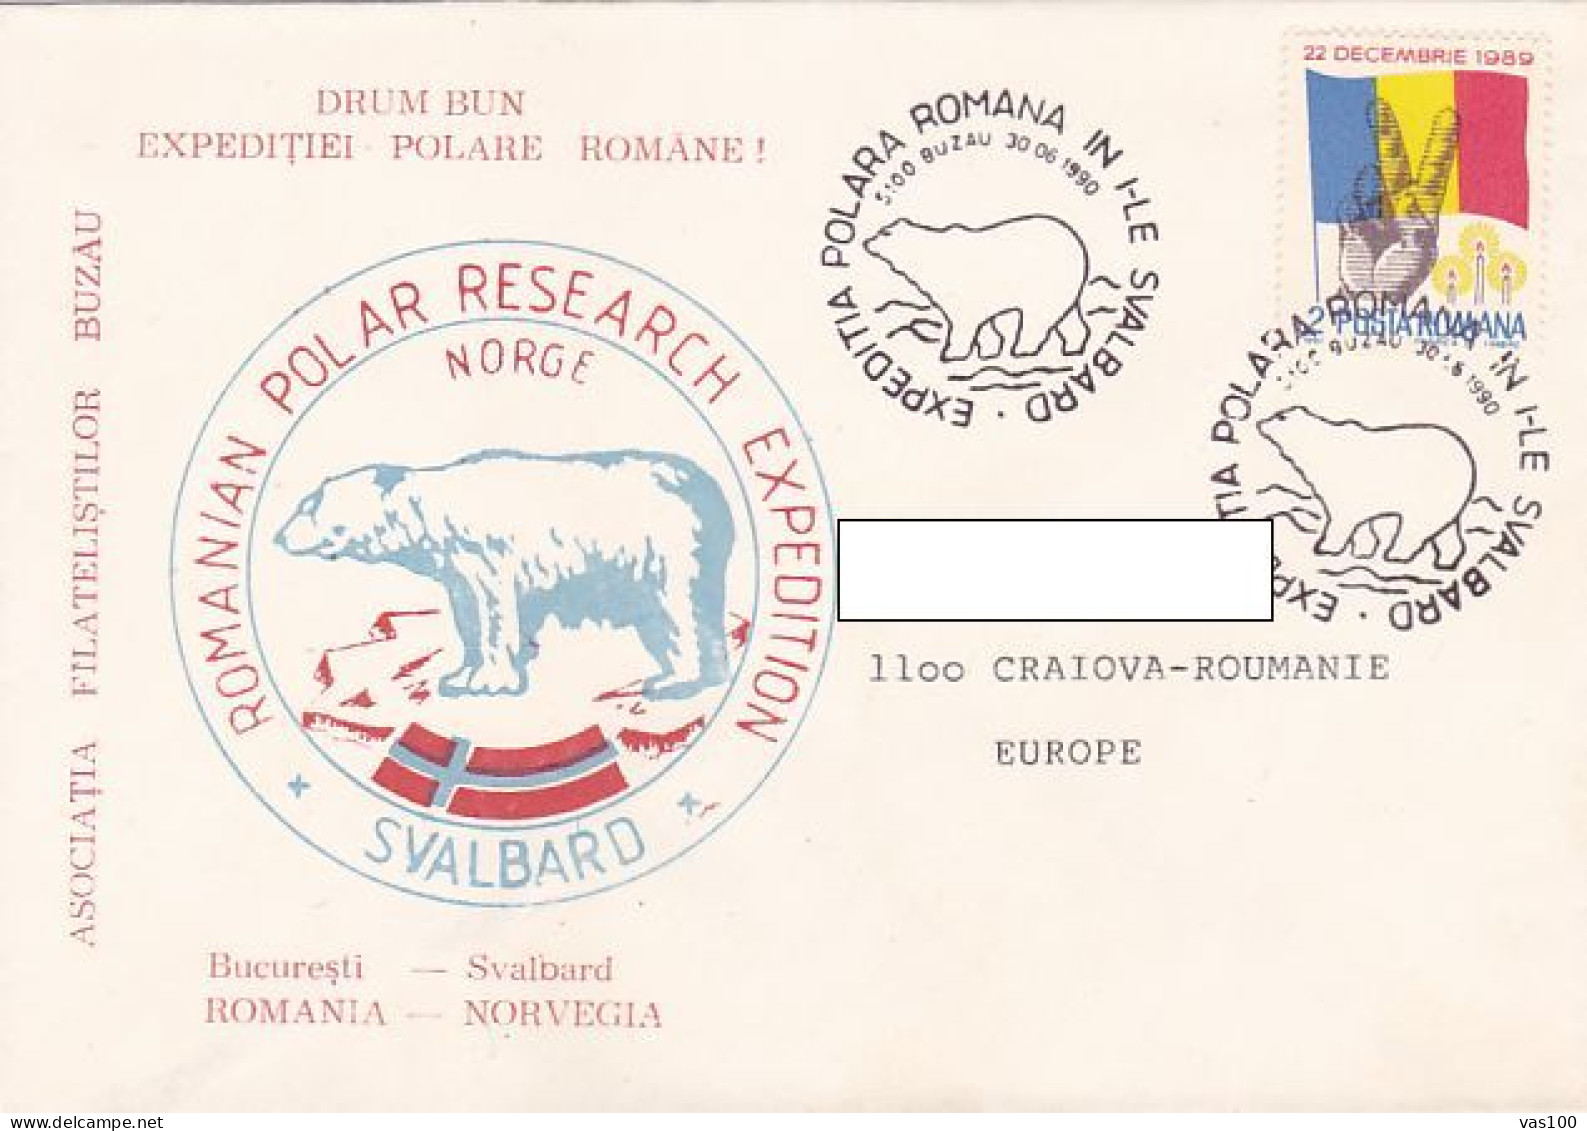 NORTH POLE, ARCTIC EXPEDITION, ROMANIAN EXPEDITION IN SVALBARD, POLAR BEAR, SPECIAL COVER, 1990, ROMANIA - Arktis Expeditionen